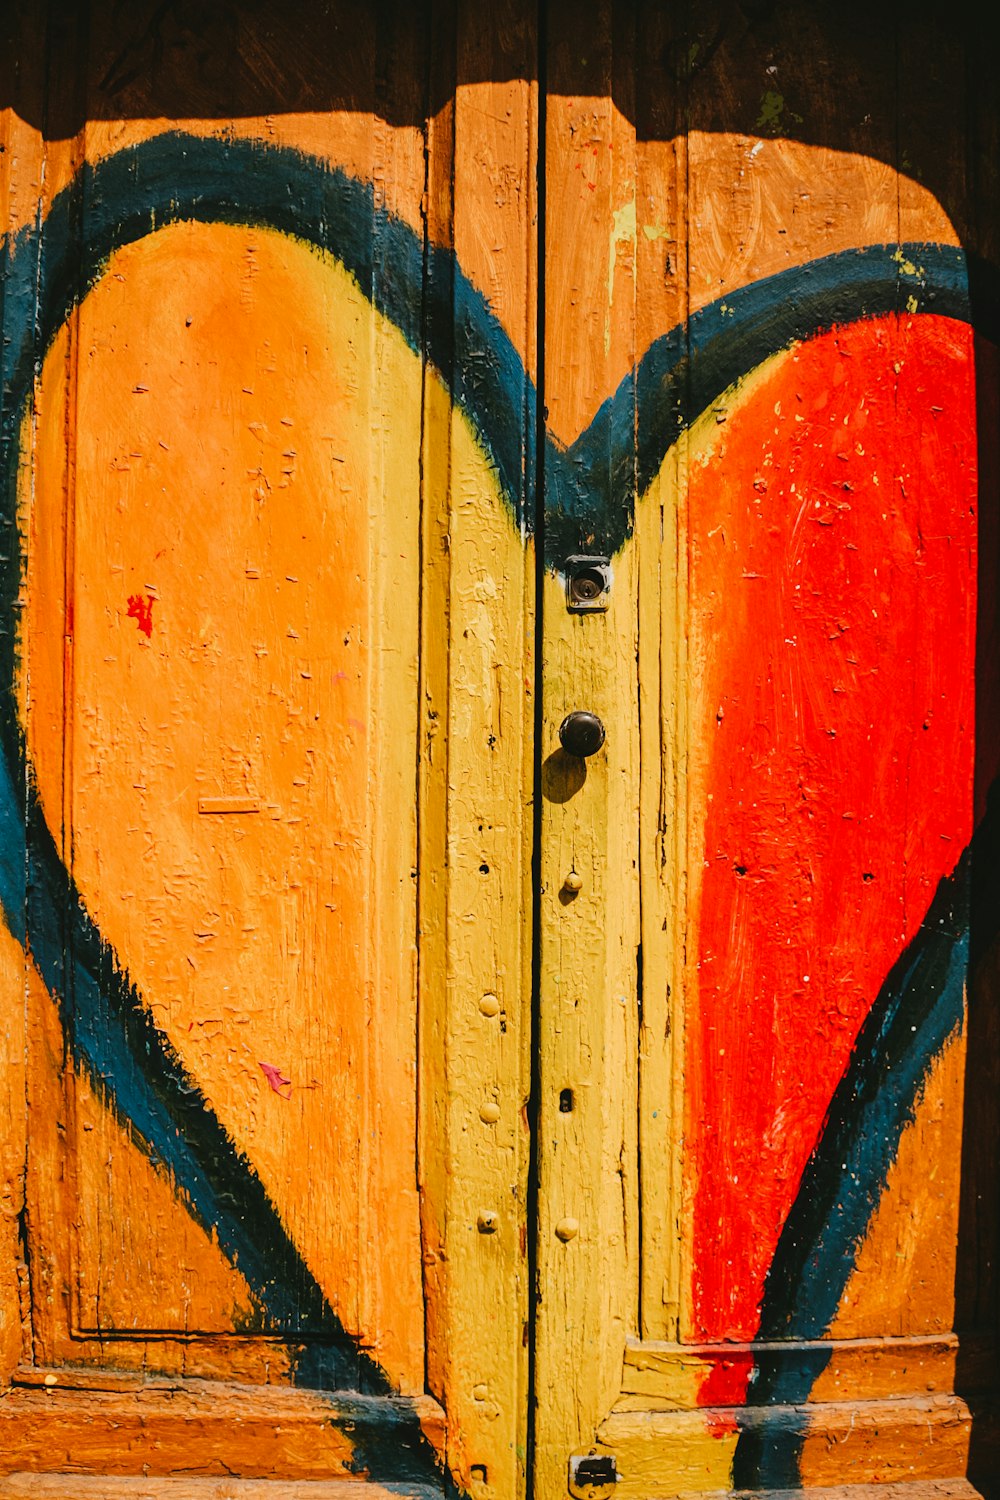 blue heart painted on a wooden panel door